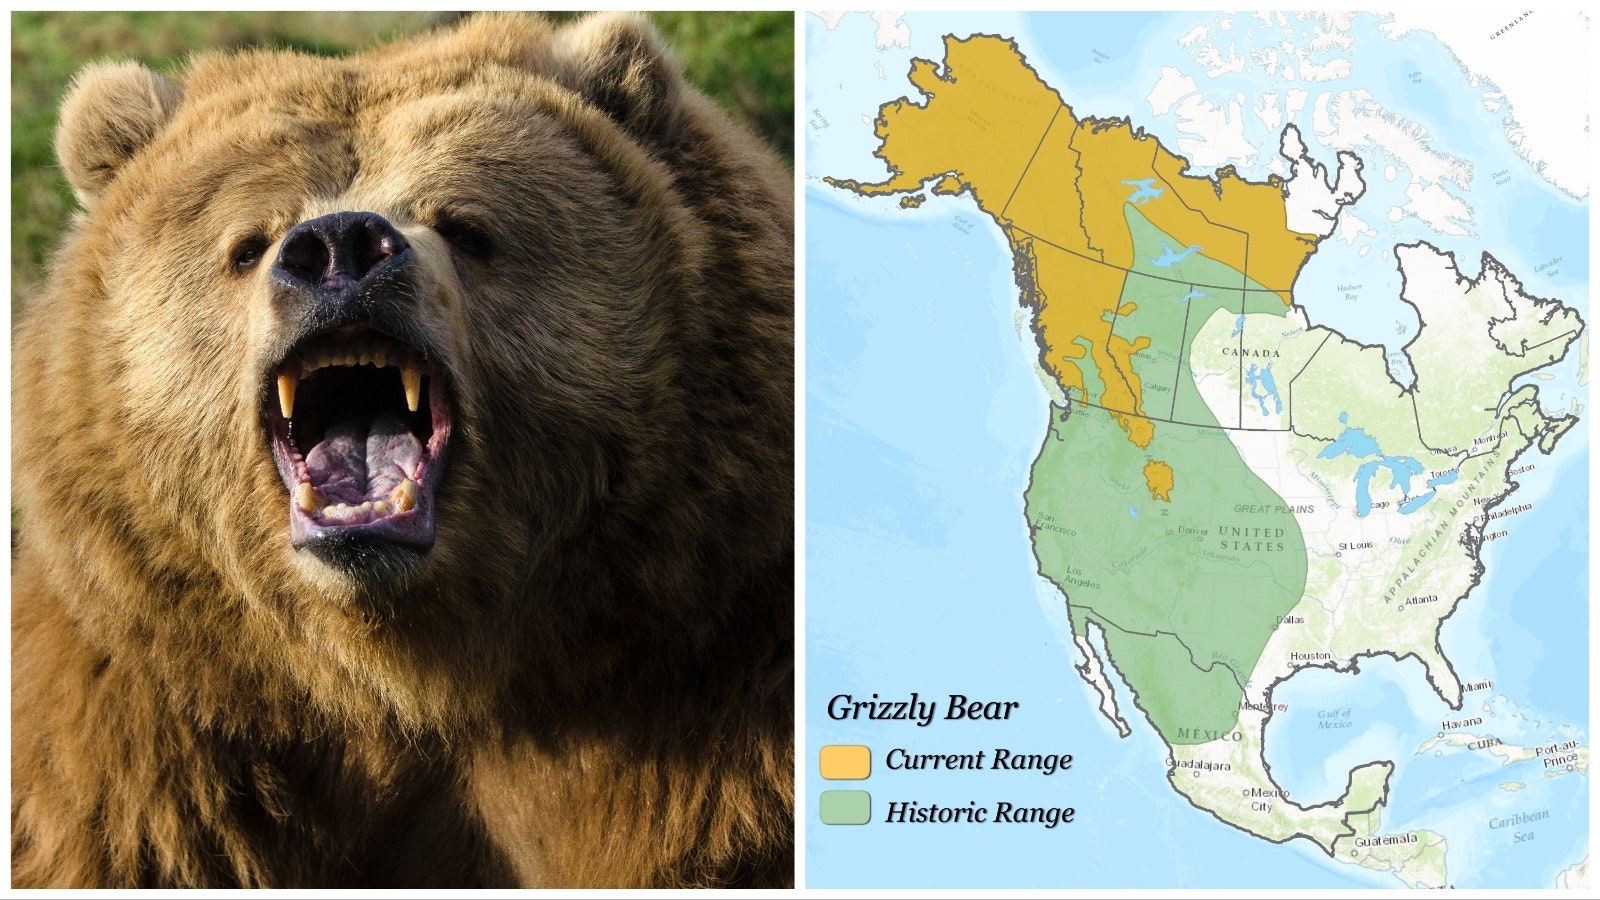 Grizzly bears once occupied much more territory, including vast swaths of the Great Plains.